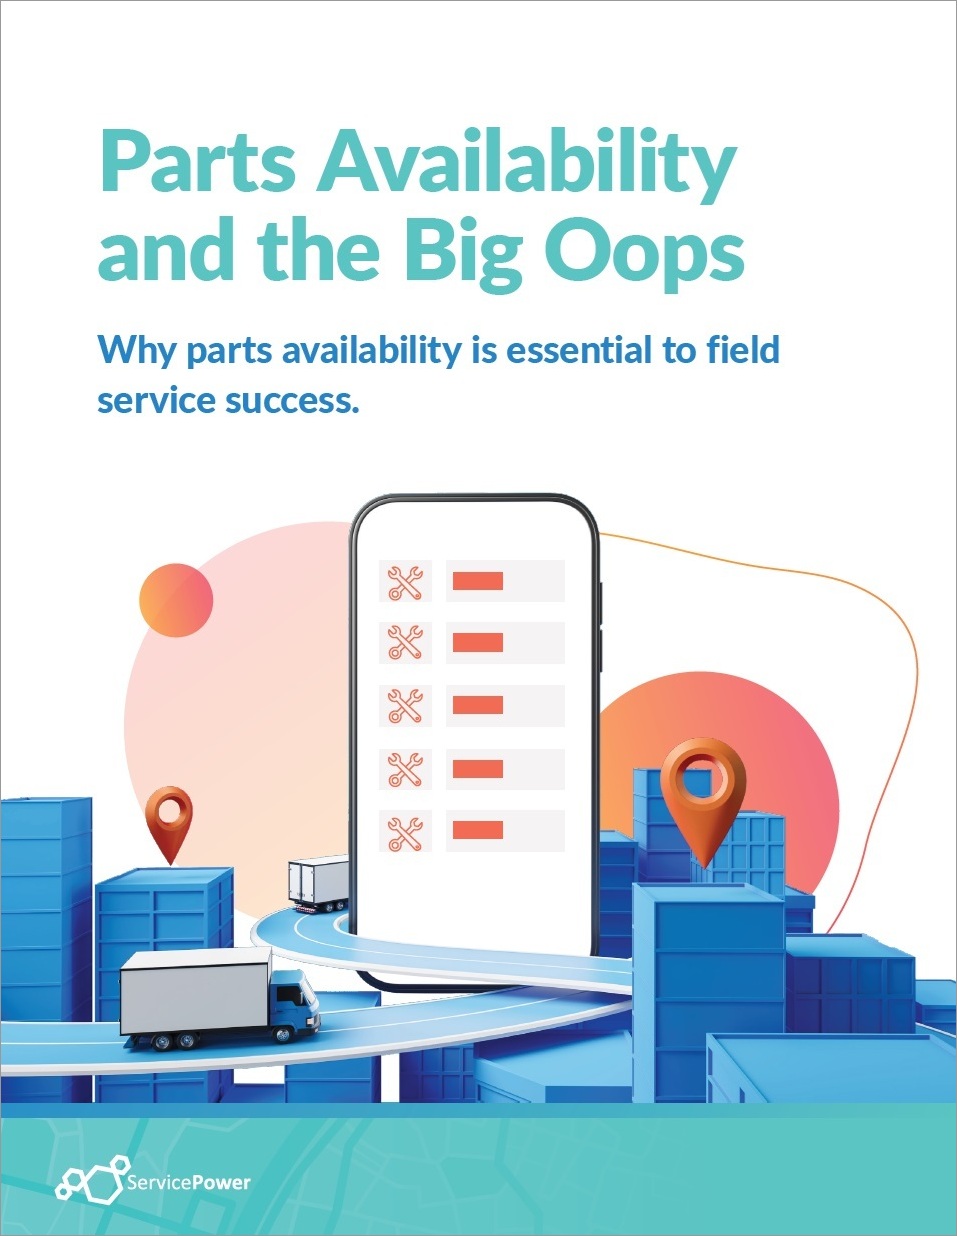 Parts Availability and the Big Oops cover image with border-1